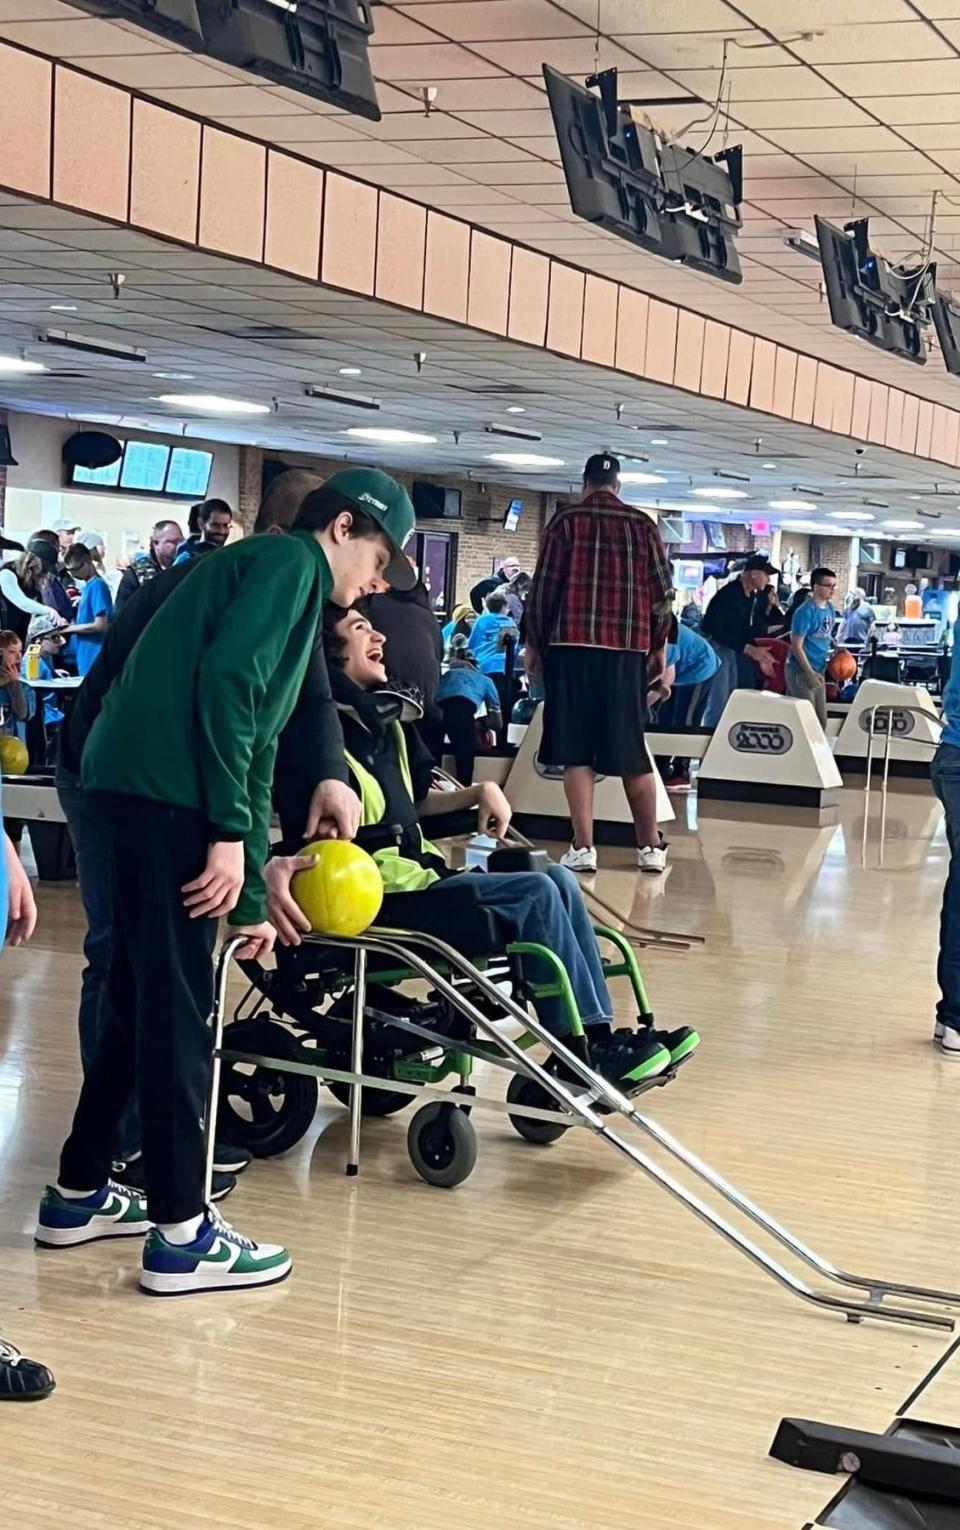 Ozzie Schons, left, of Lake Orion, helps his brother Zander launch a ball down a ramp during Miracle League of North Oakland’s first bowling event of the winter Saturday. The event for special needs kids and young adults went on as planned at Century Bowl in Waterford after a thief absconded with $350 in registration fees.